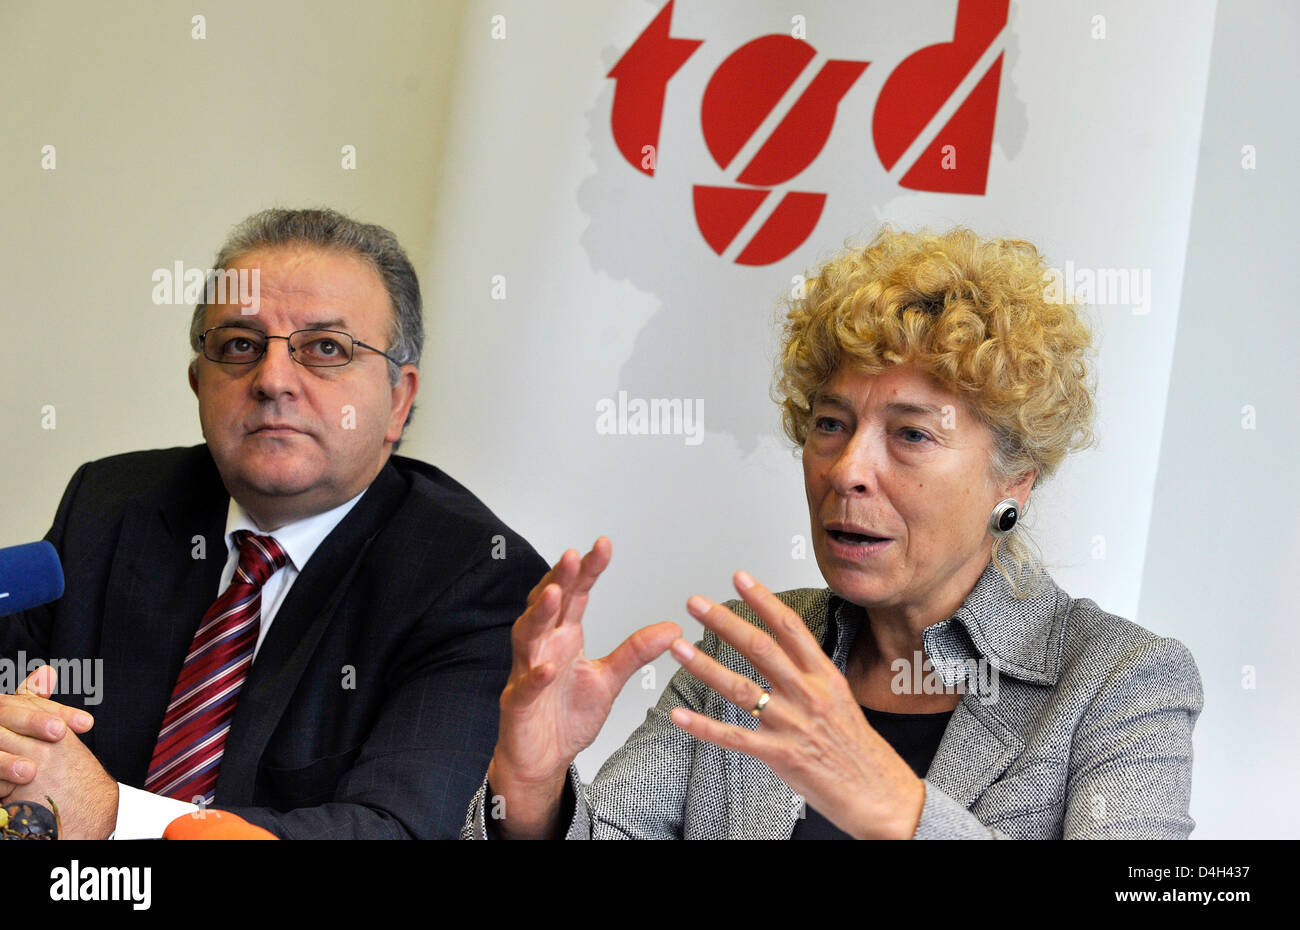 German presidential candidate of the Social Democrats (SPD), Gesine Schwan (R), and federal chairman of the Turkish Community in Germany (TGD), Kenan Kolat, give a press conference after holding talks in Berlin, Germany, 22 October 2008. Photo: Gero Breloer Stock Photo